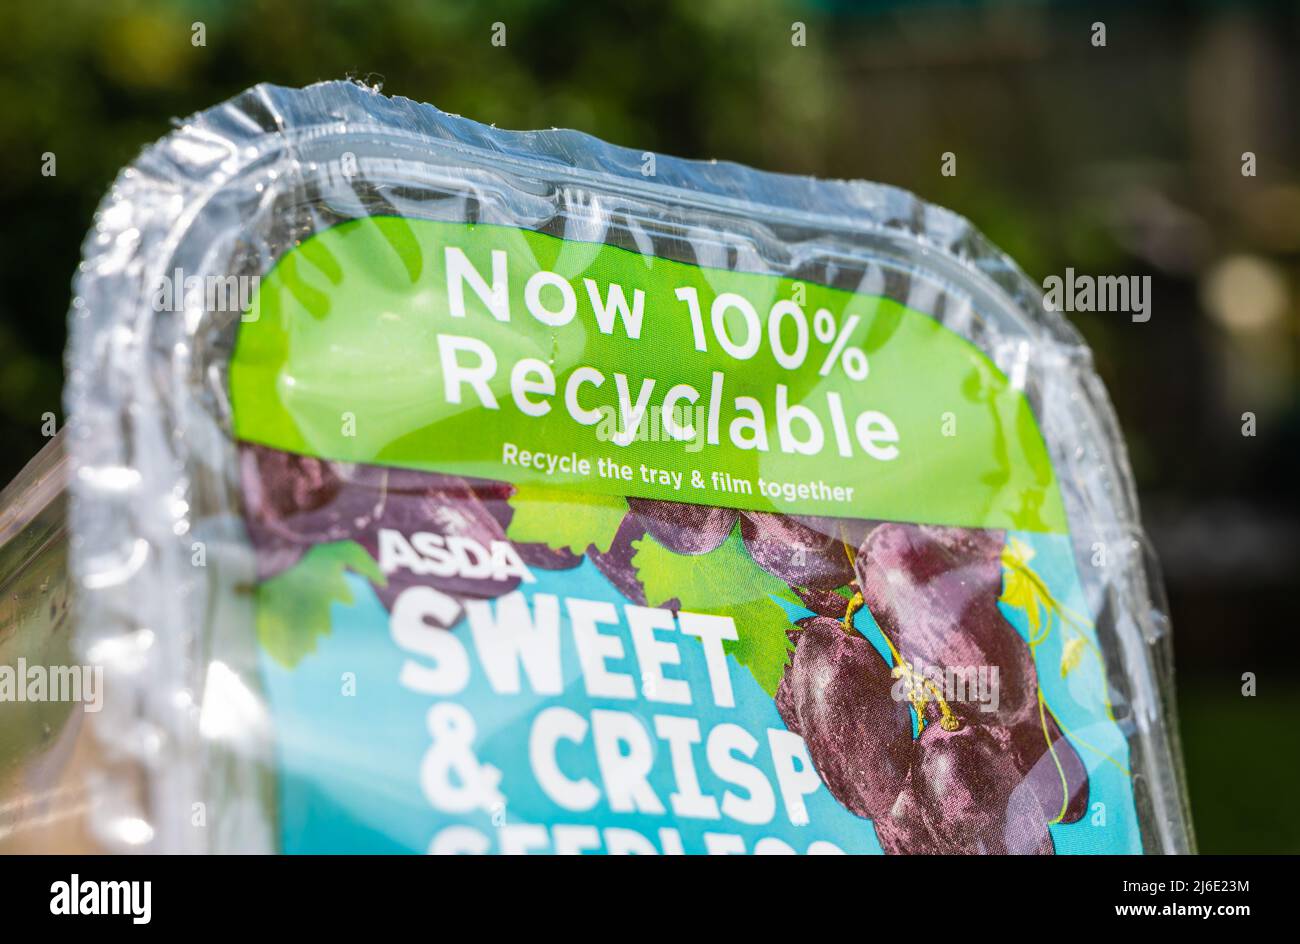 Food packaging for grapes from a British UK grocery store claiming to be 100% recyclable. Stock Photo